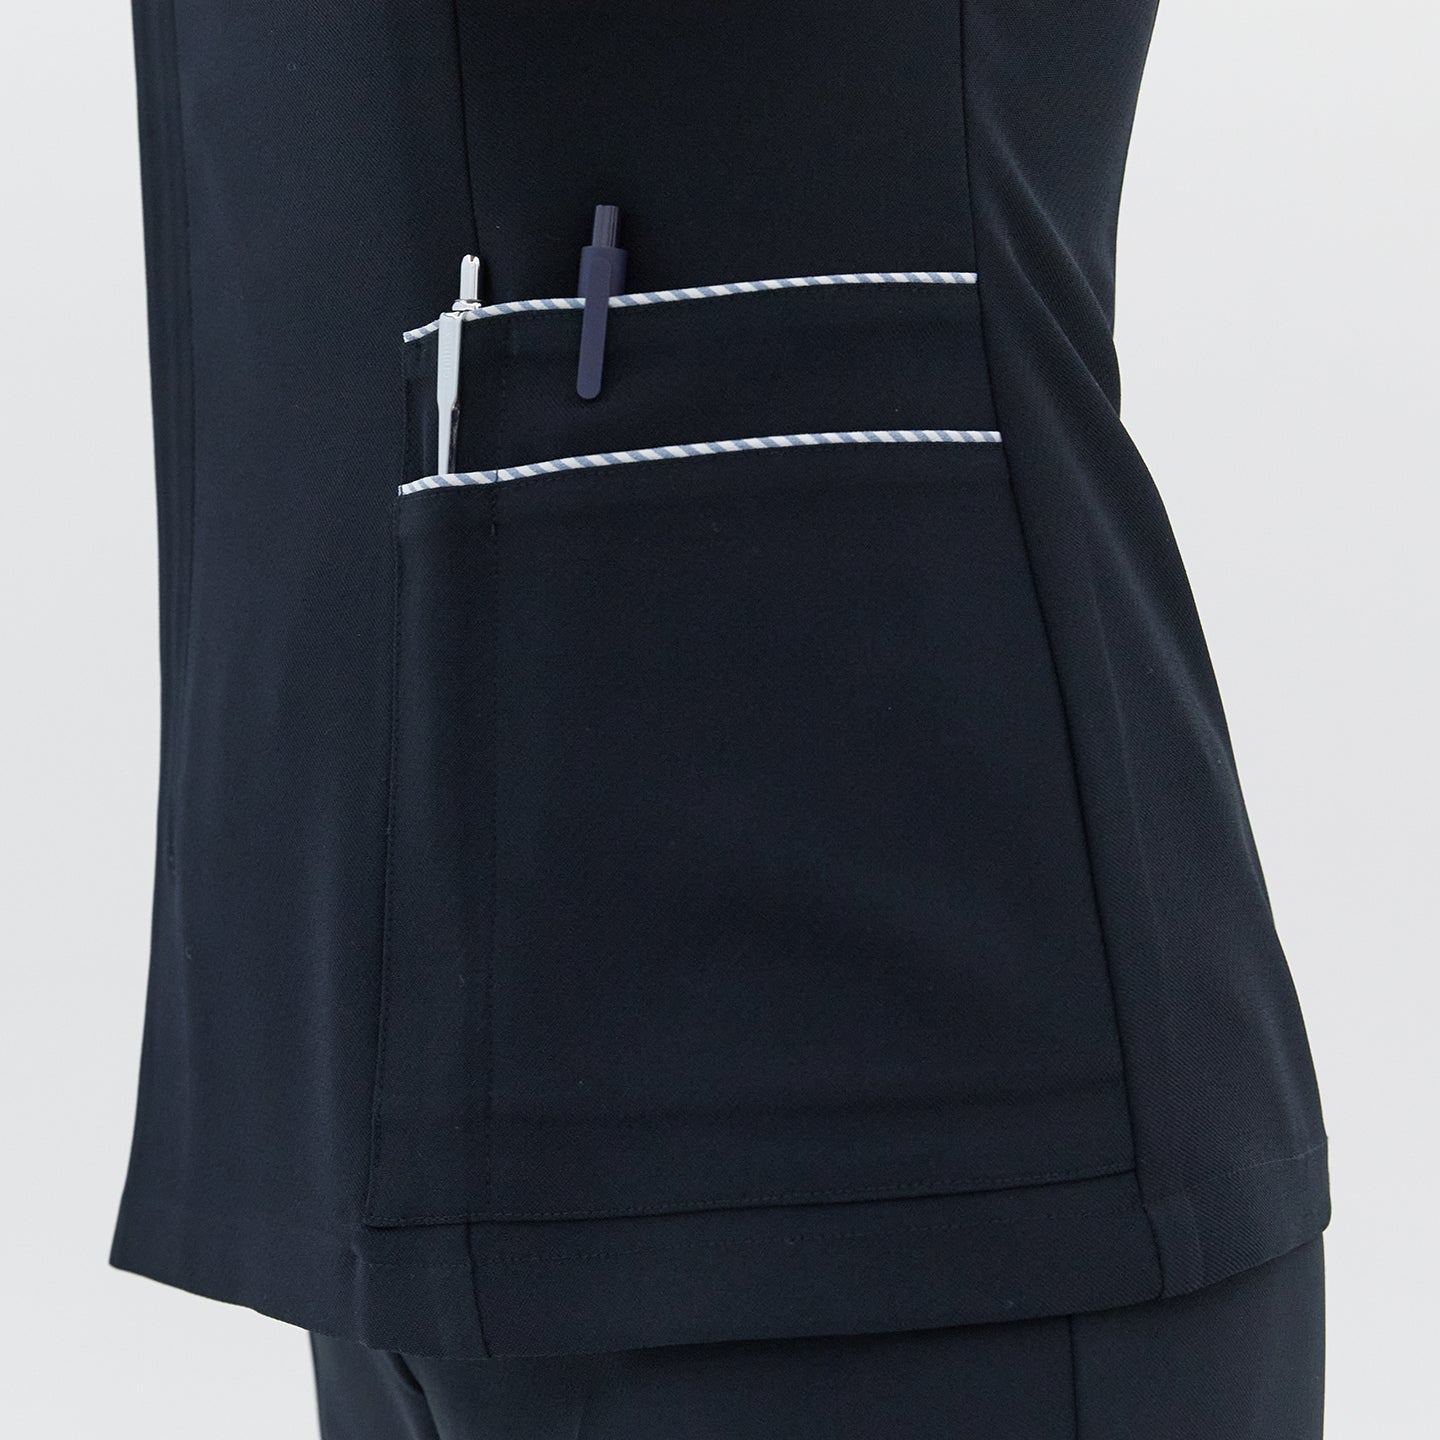  A detailed view of the side pocket on a navy round-neck top, featuring white trim and holding two pens,Navy